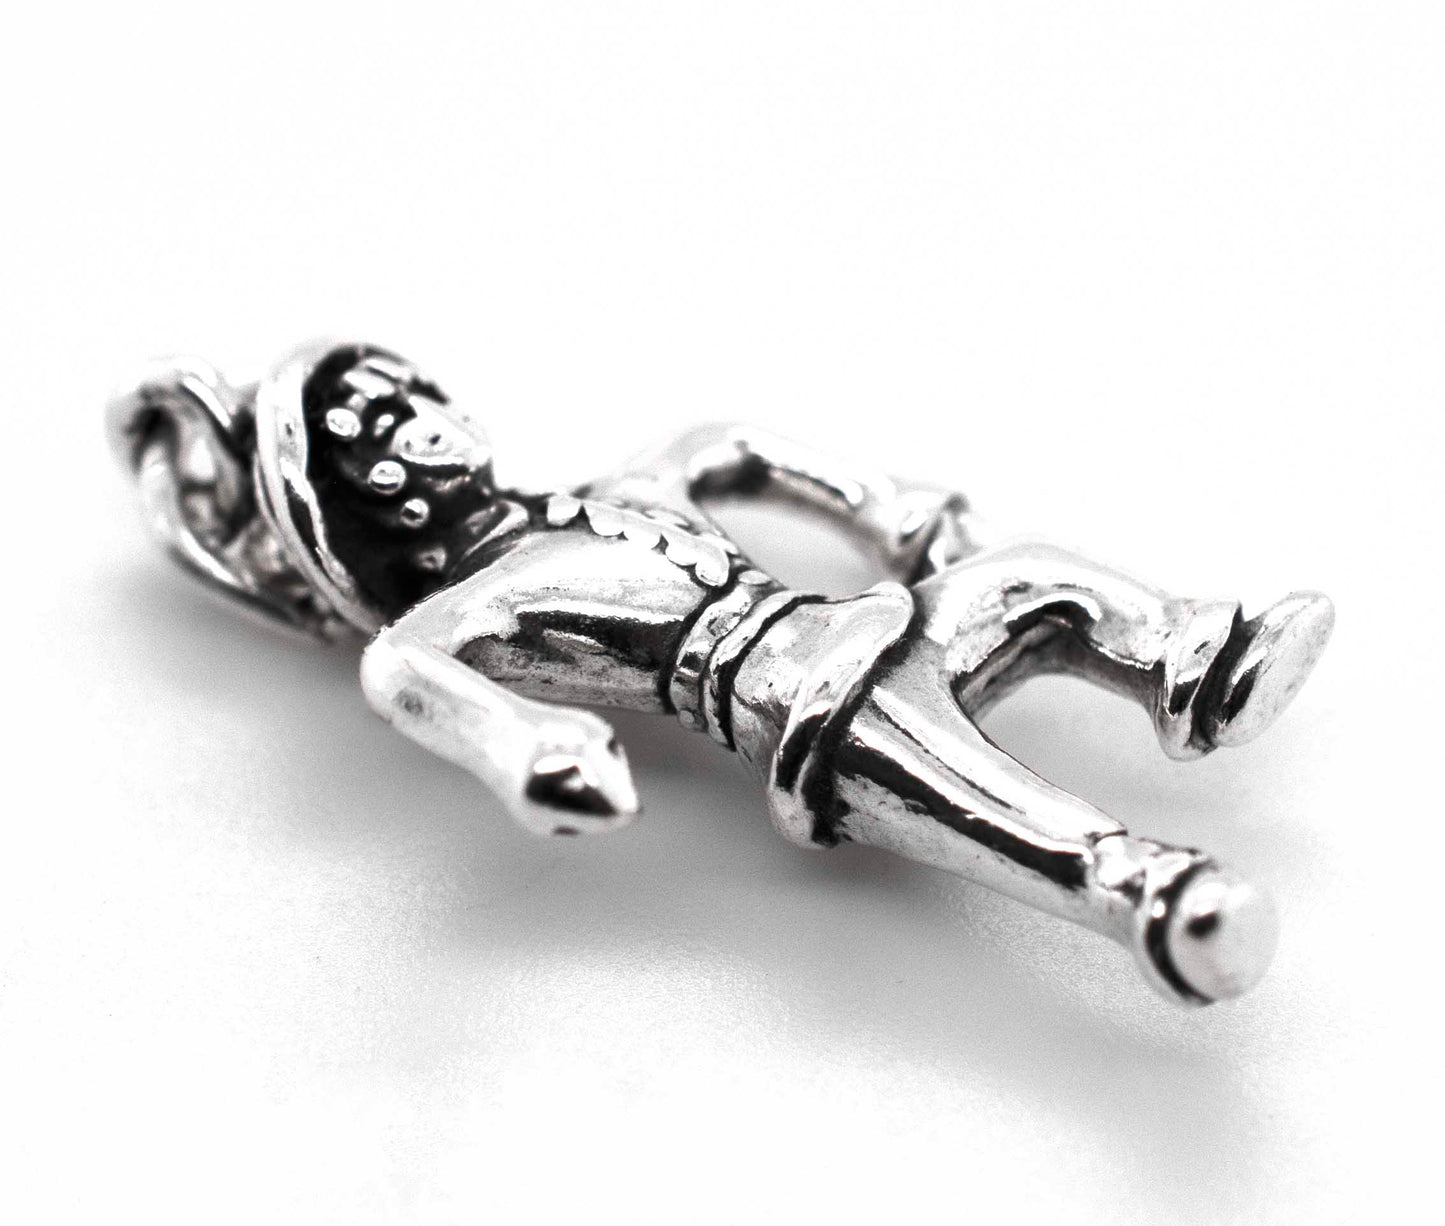 A Dancing Scarecrow Charm made by Super Silver, depicting a scarecrow figure.